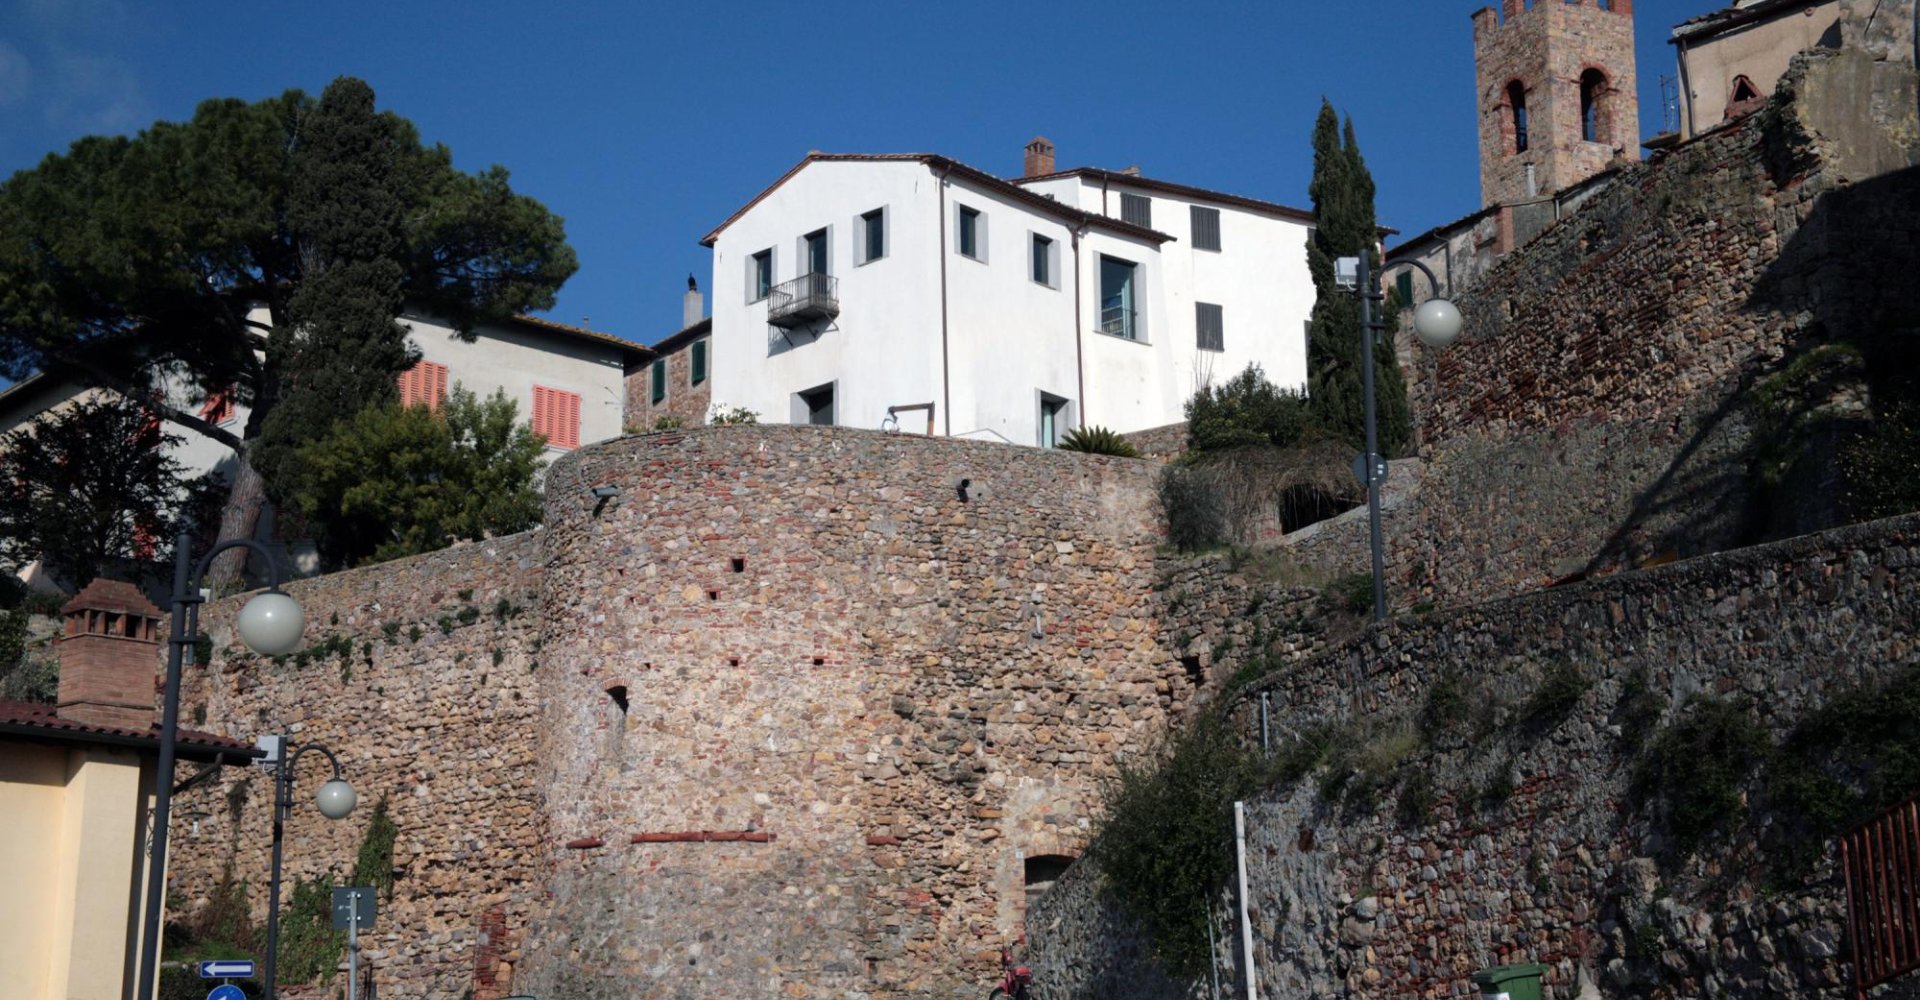 The walls of Montepescali